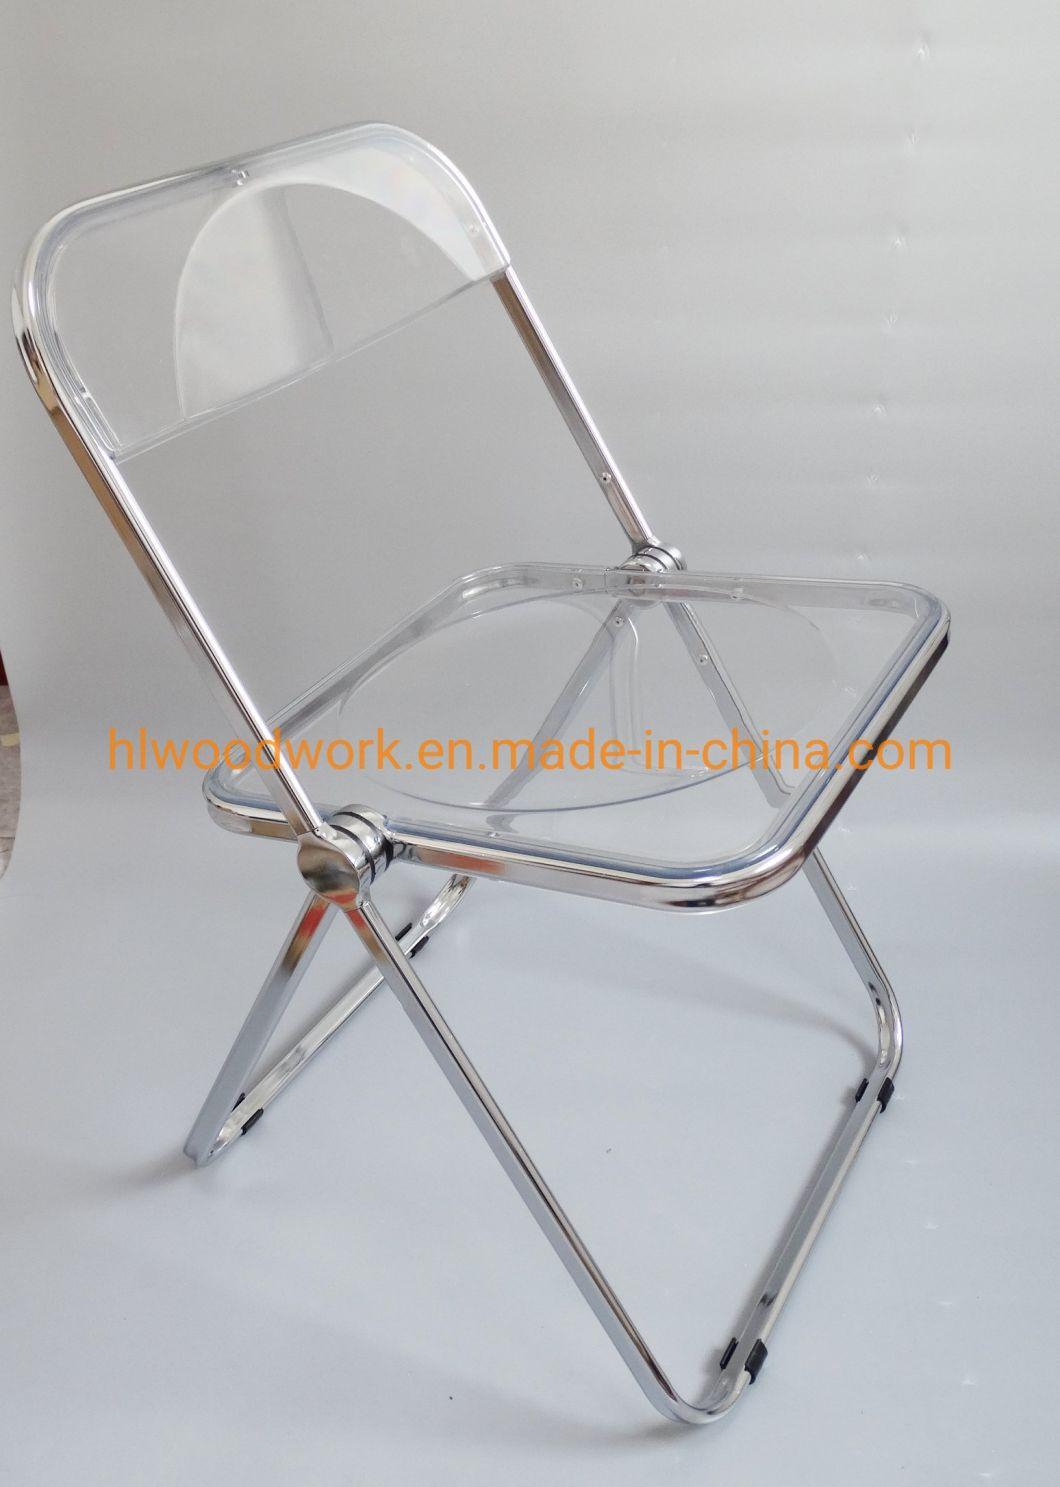 Modern Transparent Pink Folding Chair PC Plastic Dining Room Chair Chrome Frame Office Bar Dining Leisure Banquet Wedding Meeting Chair Plastic Dining Chair